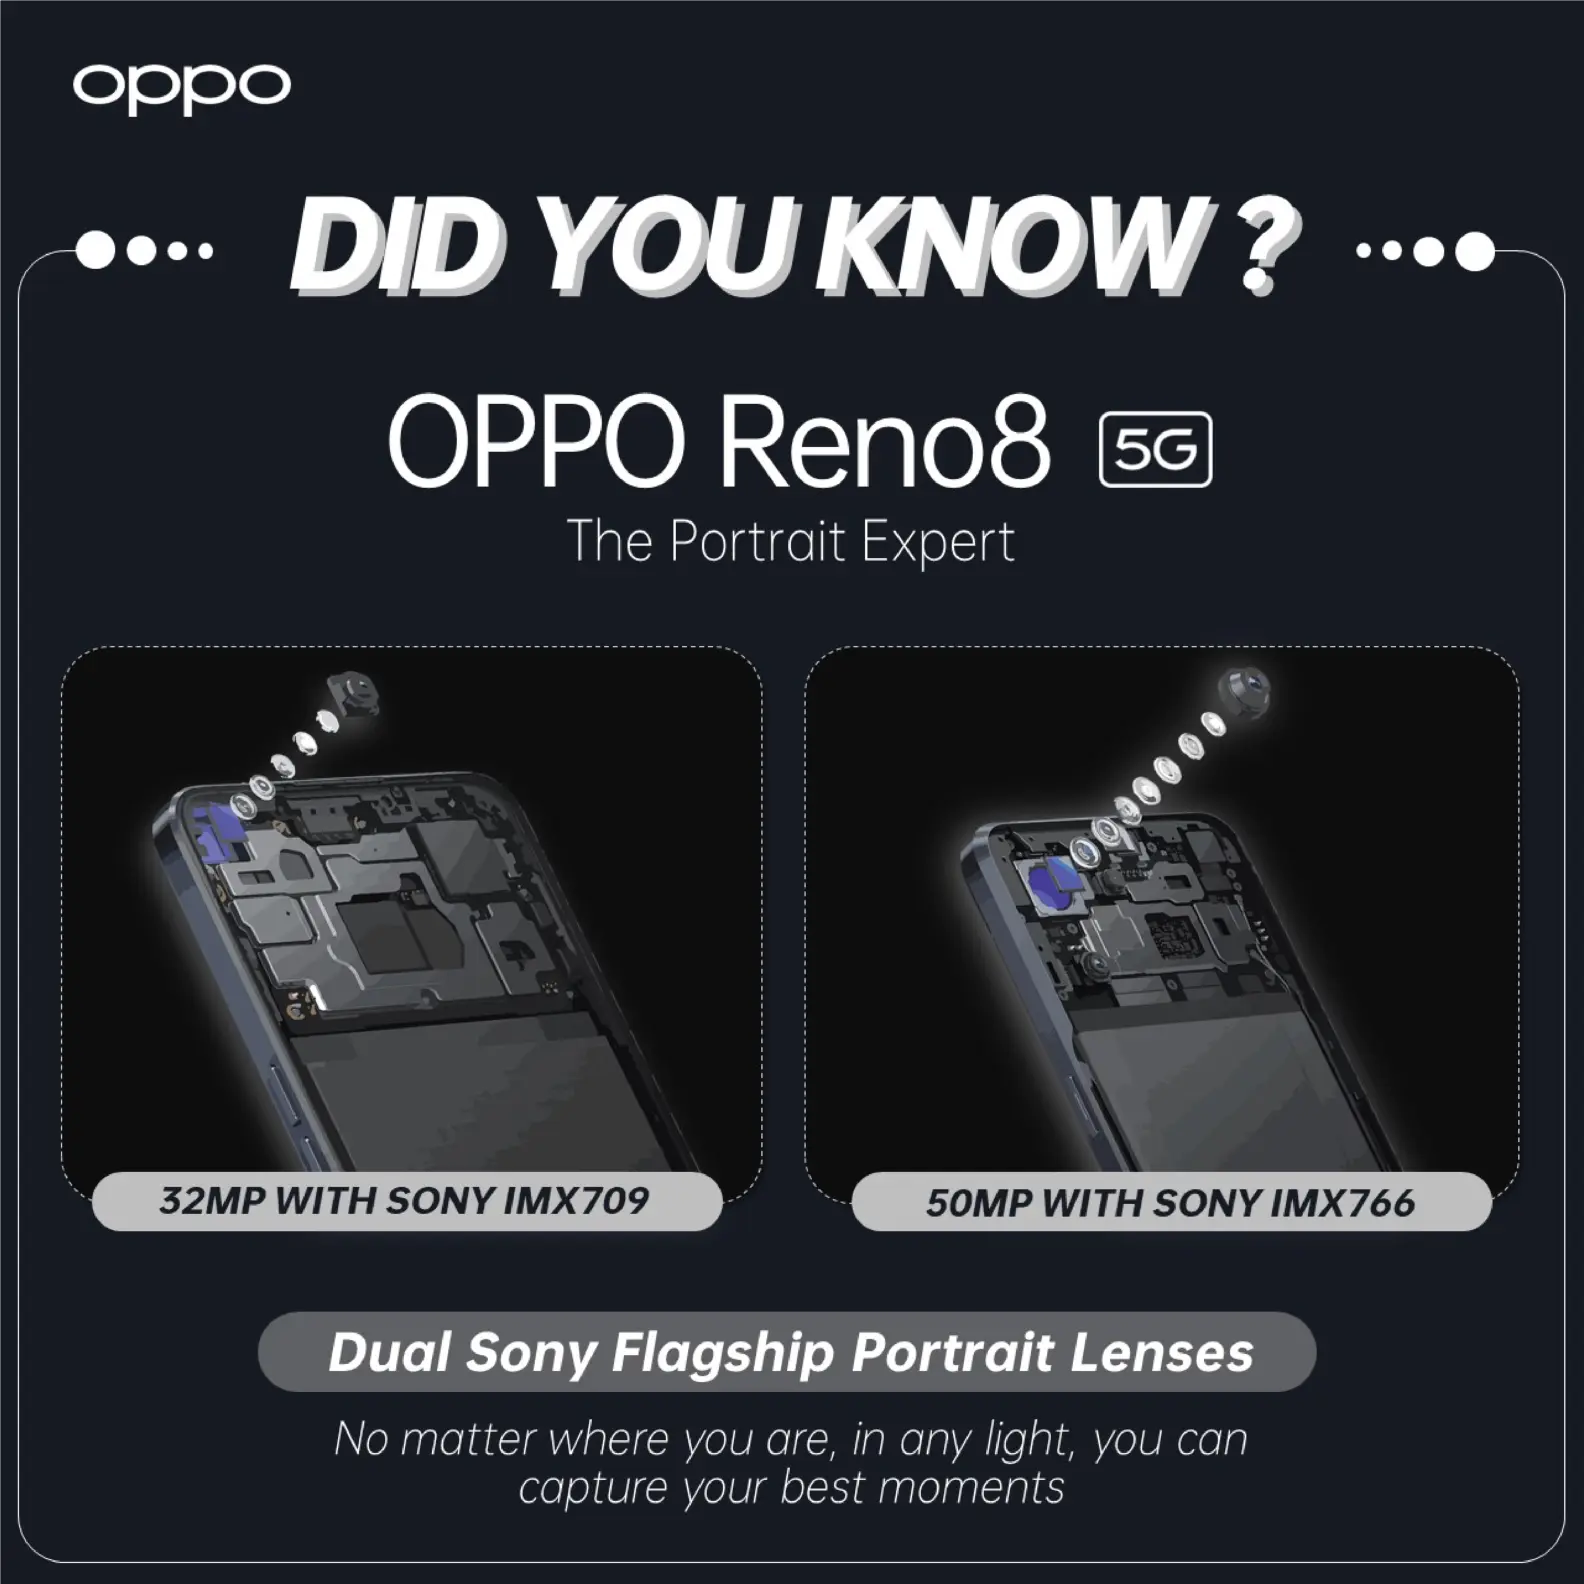 OPPO Reno 7 series tipped for the Dimensity 920, Dimensity 1200, and  Snapdragon 888 as tentative details surface -  News